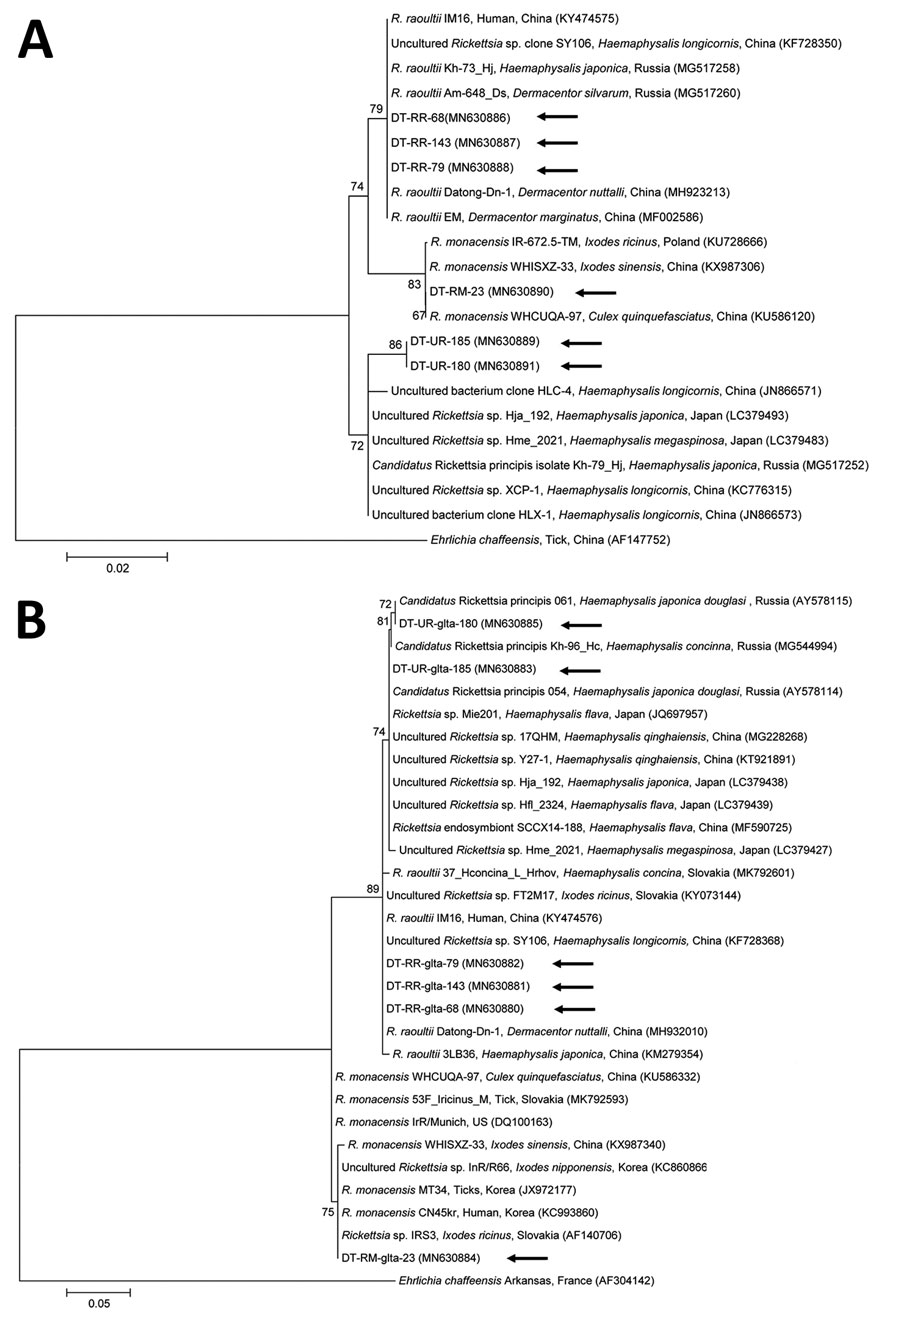 Phylogenetic trees constructed using the maximum-likelihood method based on nucleotide sequences of Rickettsia spp. from canine ticks, South Korea (black arrows), and reference sequences. A) 16S rRNA; (B) gltA. Ehrlichia chaffeensis sequences were used as outgroups. GenBank accession numbers for references sequences are shown with the sequence name. Branch numbers indicate bootstrap support (1,000 replicates). Scale bar indicates phylogenetic distance. 